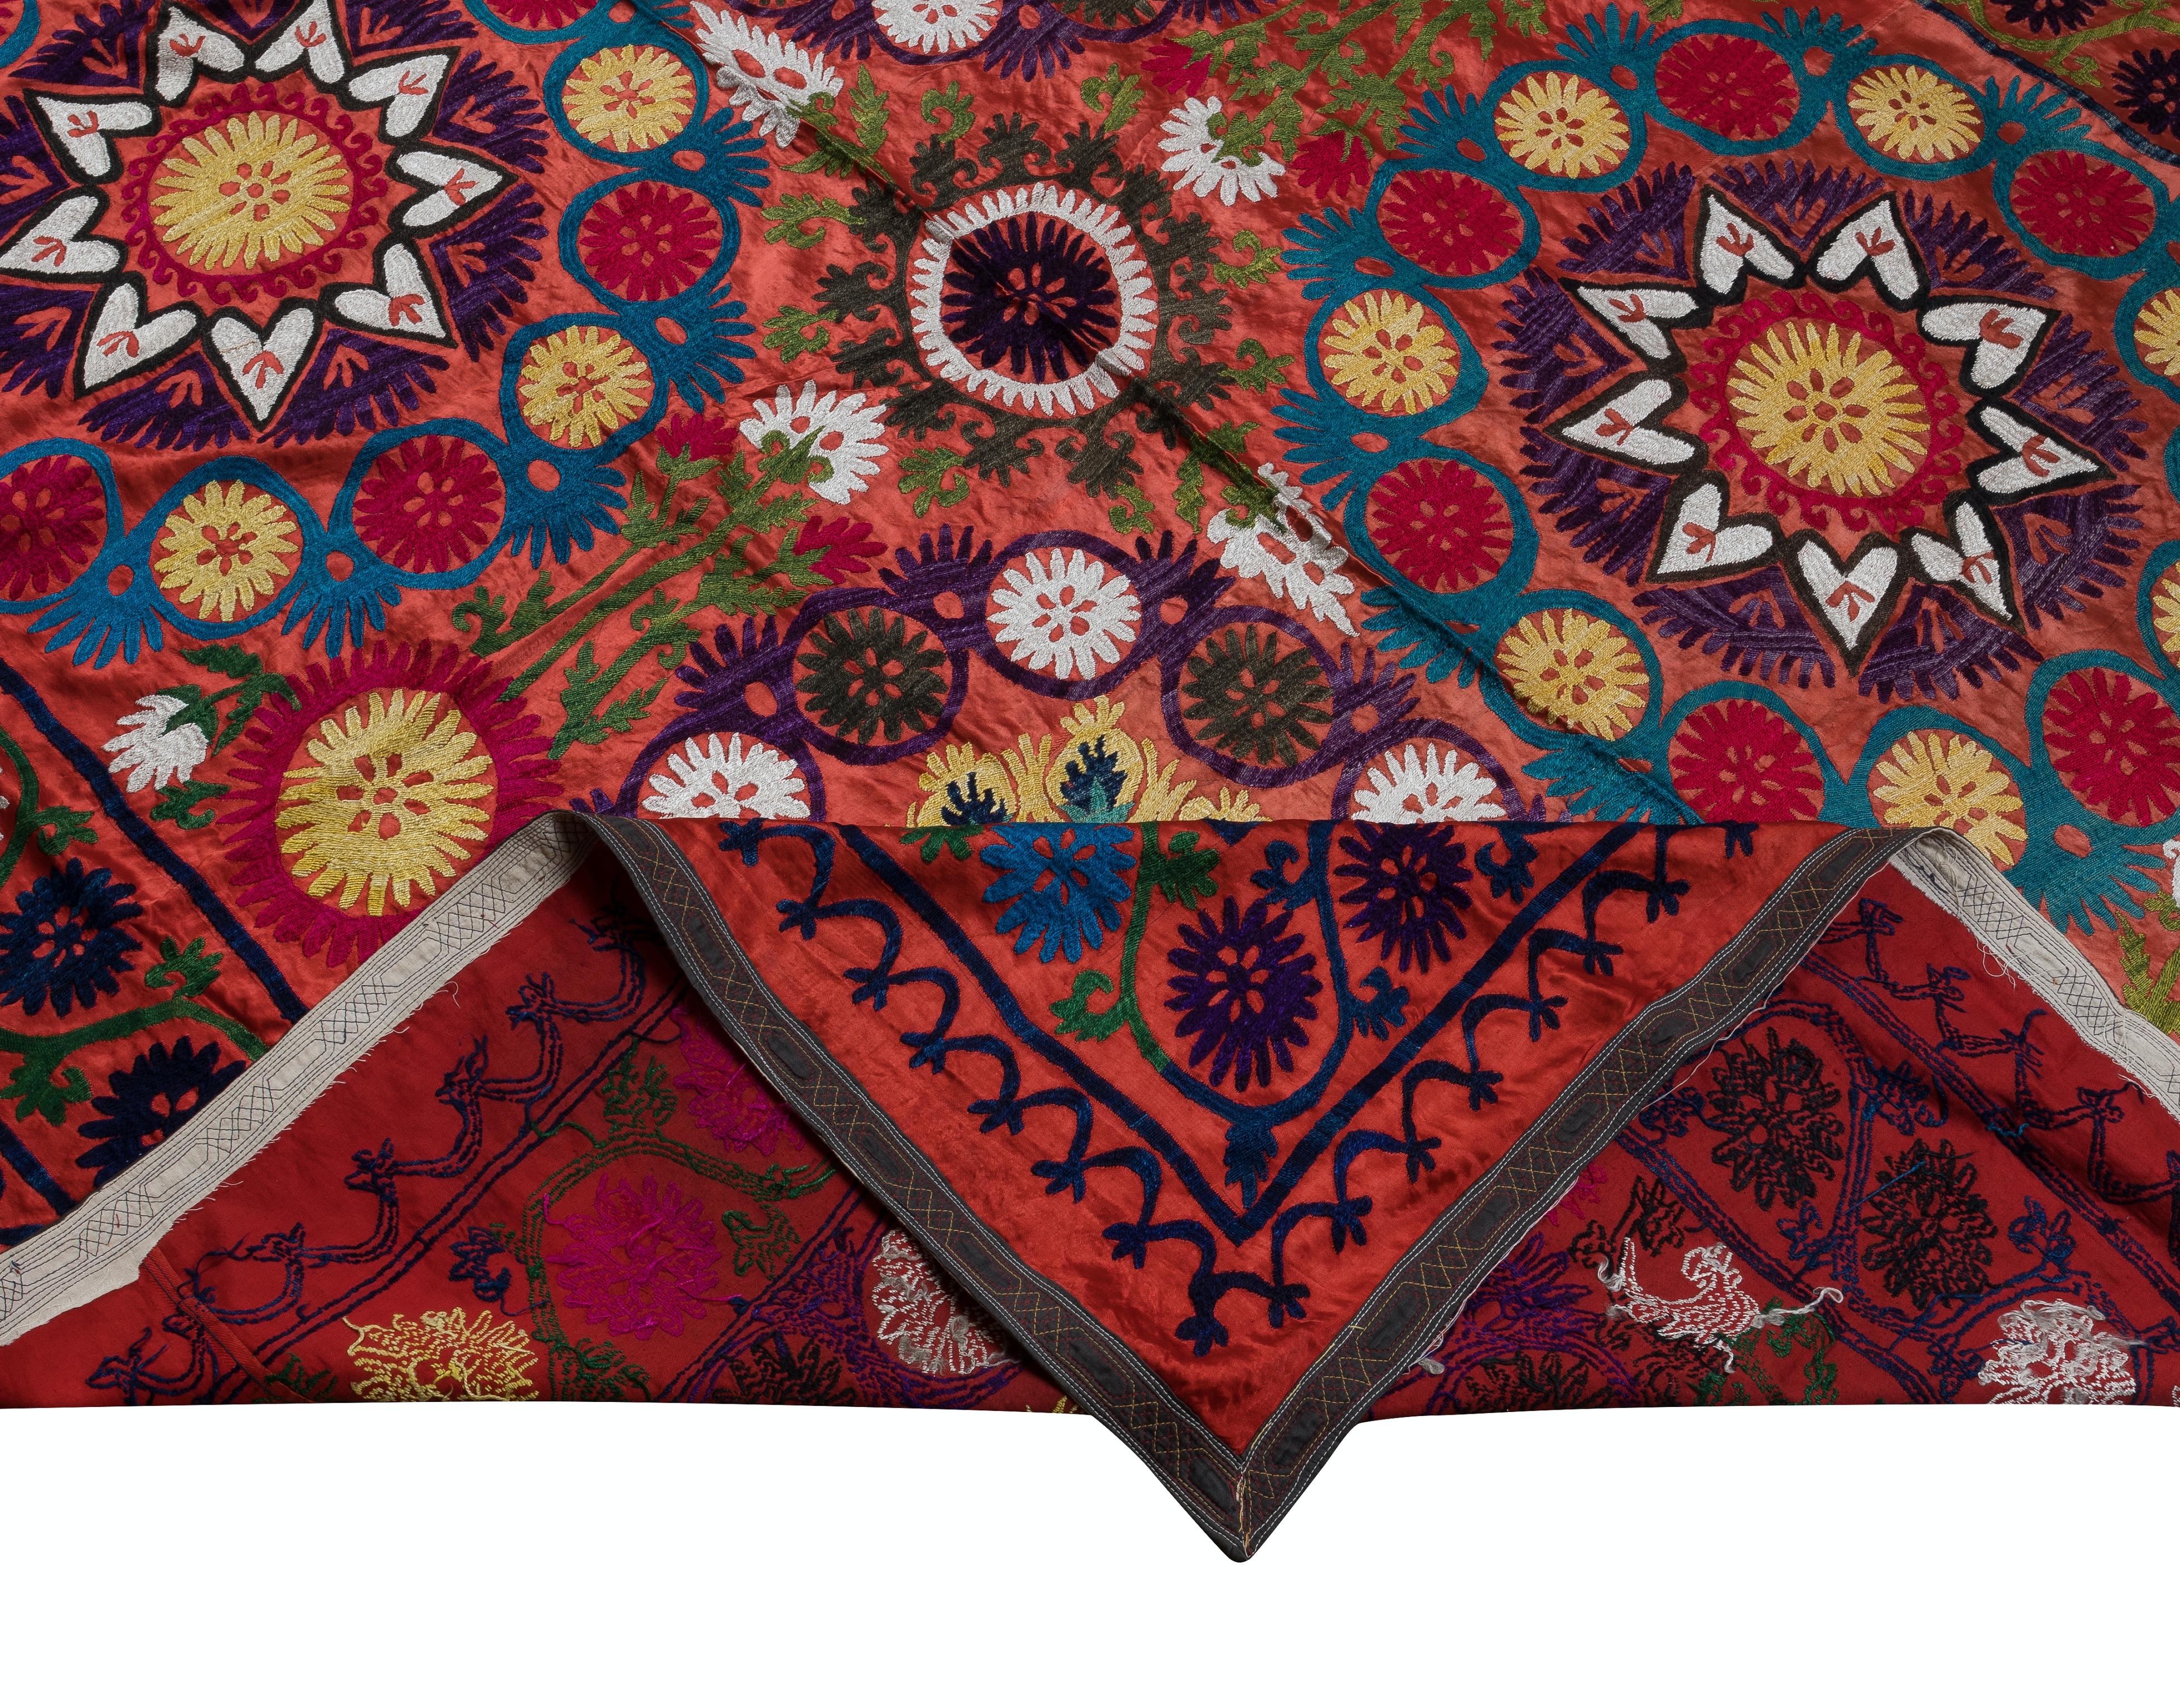 Step into a world of vibrant colors and intricate craftsmanship with our Uzbek Suzani Hand Embroidered Silk Wall Hanging or Bed Cover. This stunning piece is perfect for adding a touch of elegance to your home decor.

Made from a blend of silk and